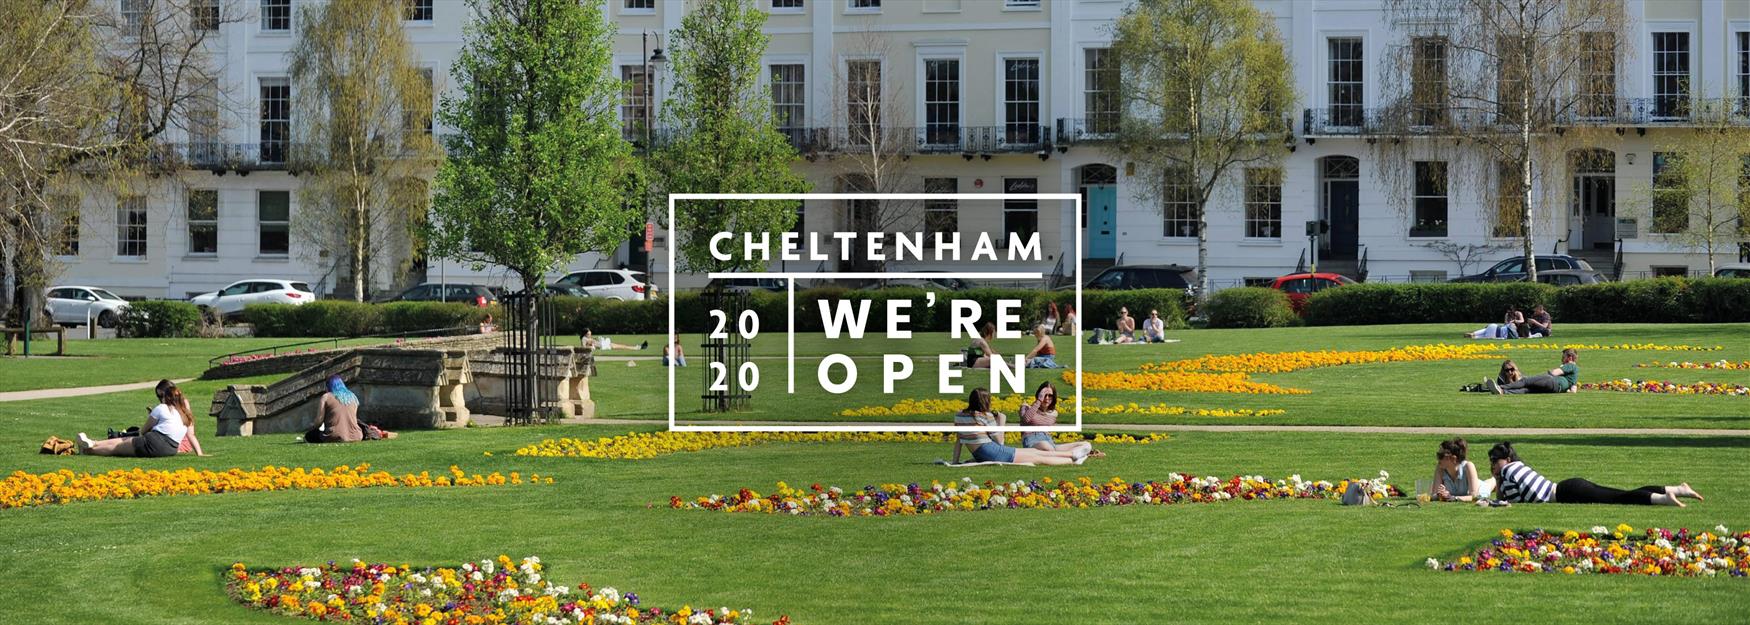 People enjoying Imperial Gardens with text saying Cheltenham, we're open